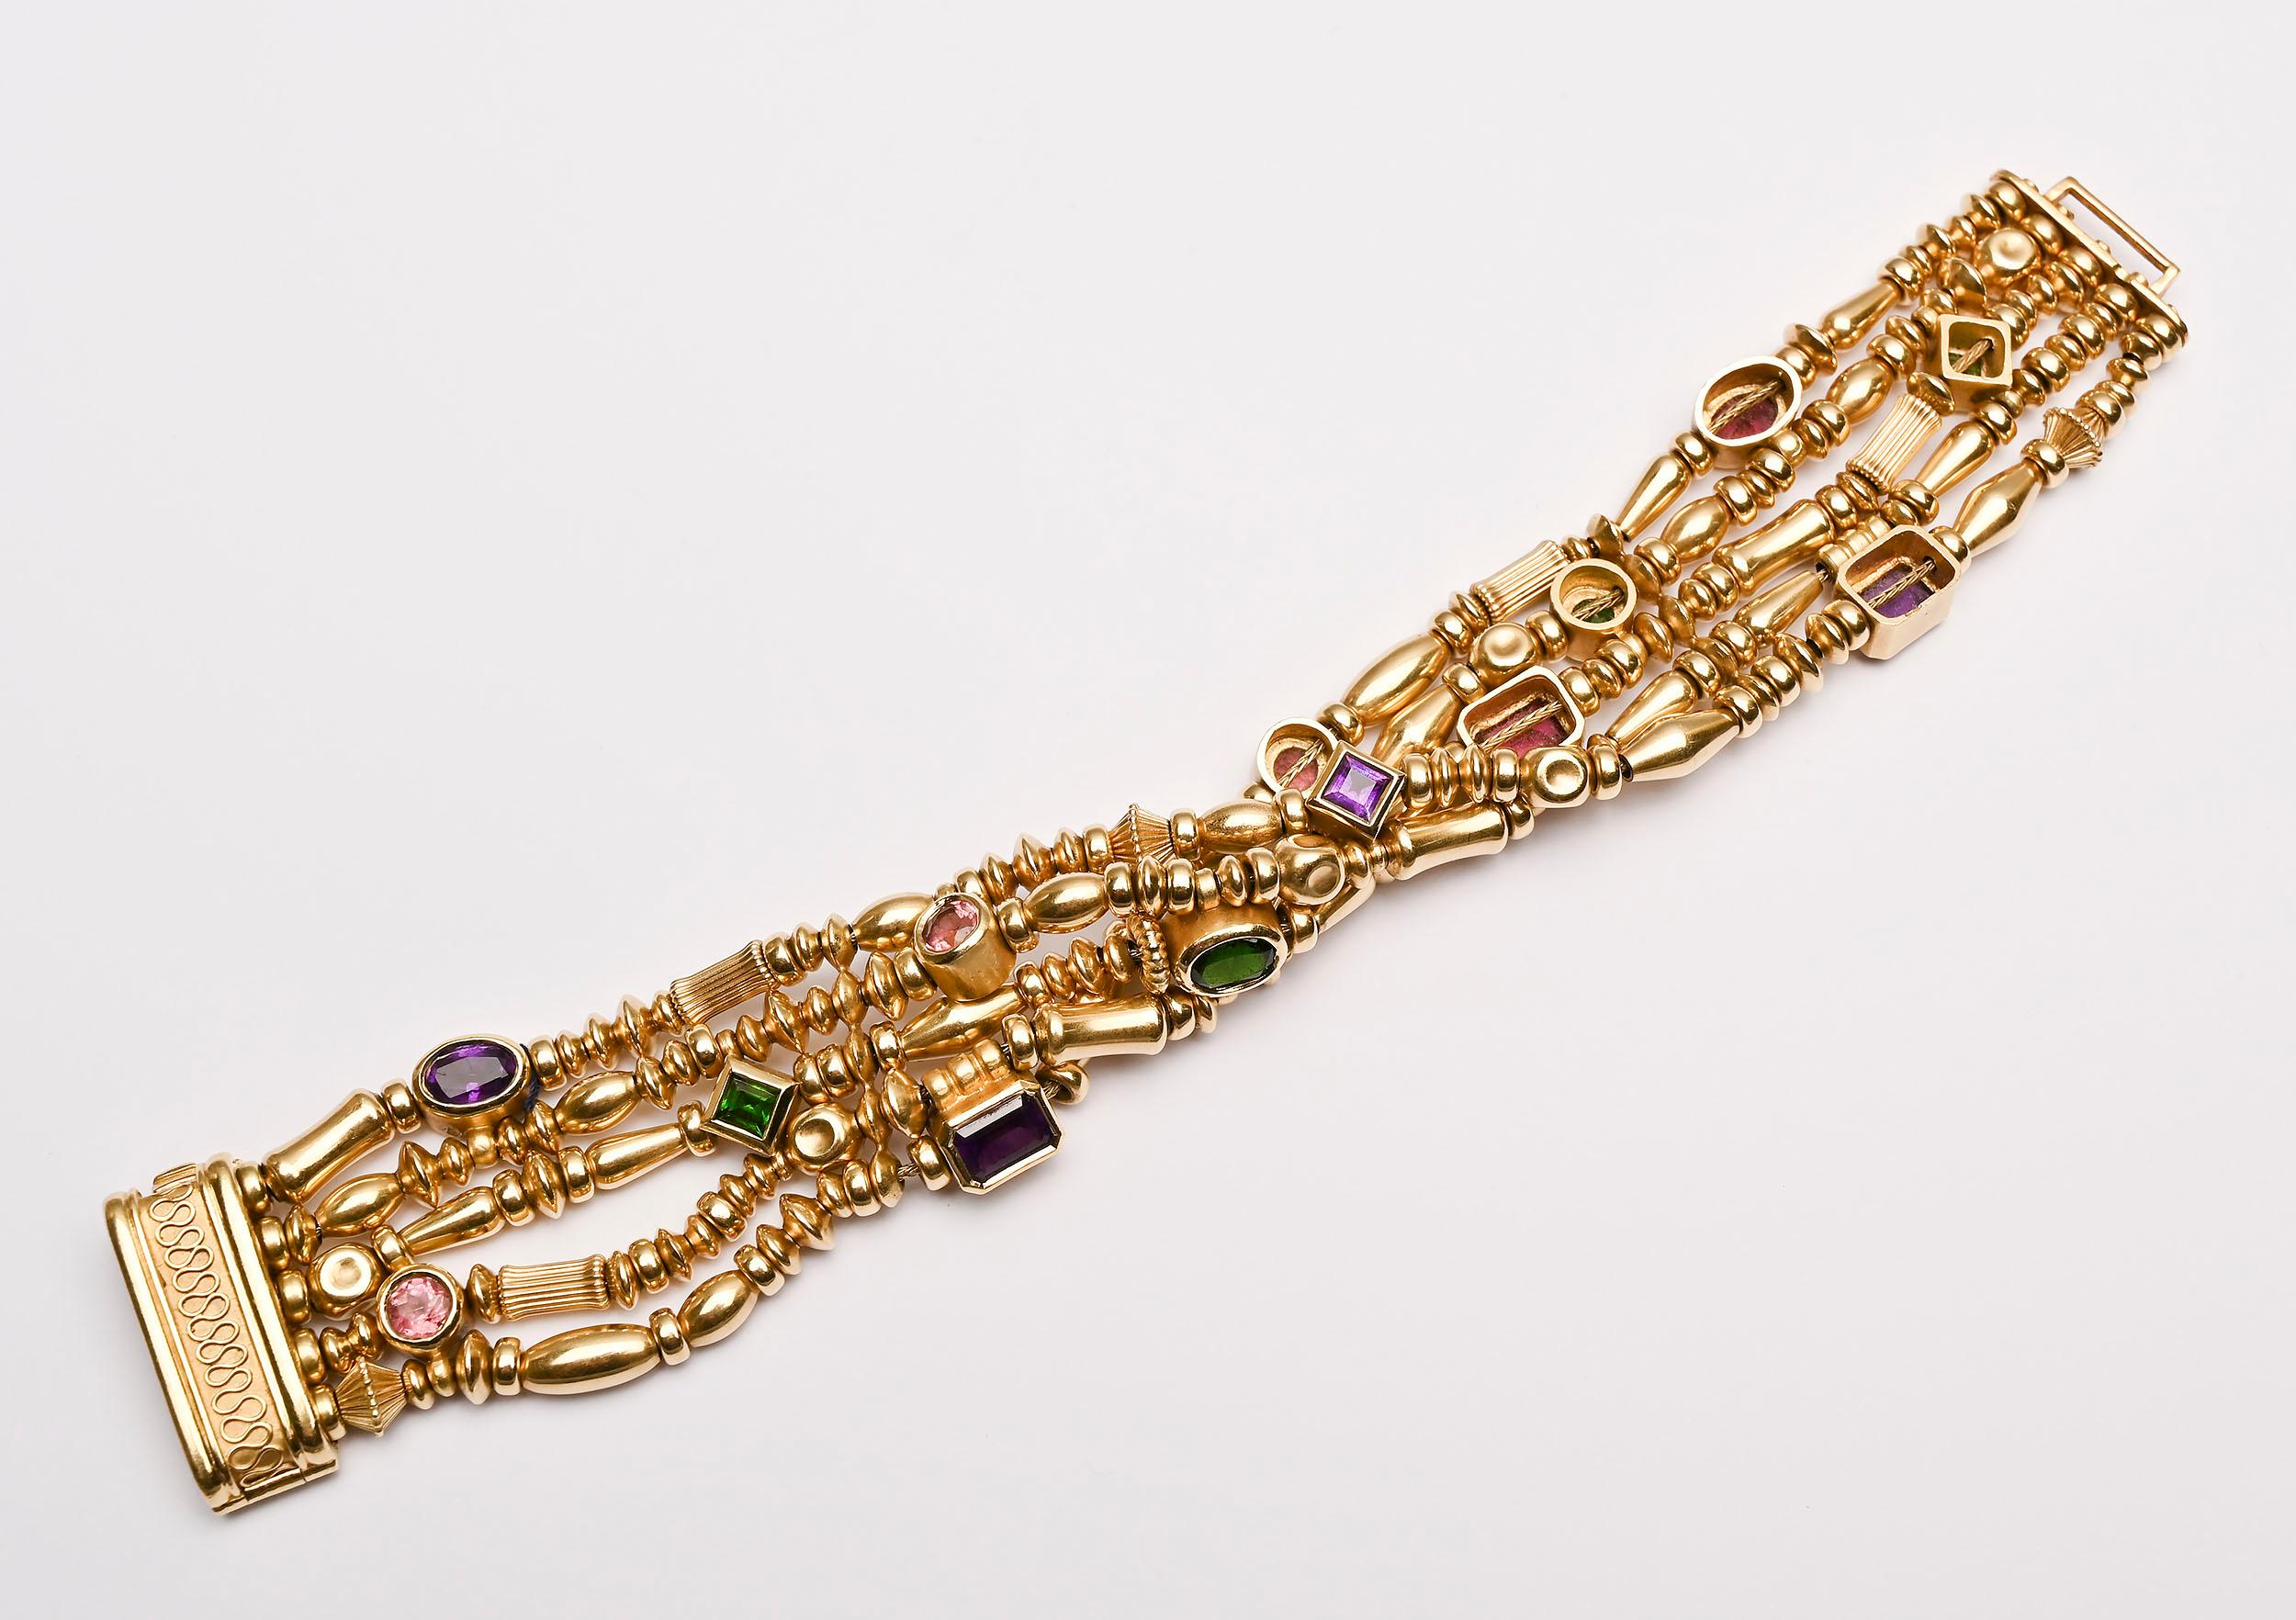 Mixed Cut Seidengang Multistrand Gold and Gemstone Bracelet For Sale